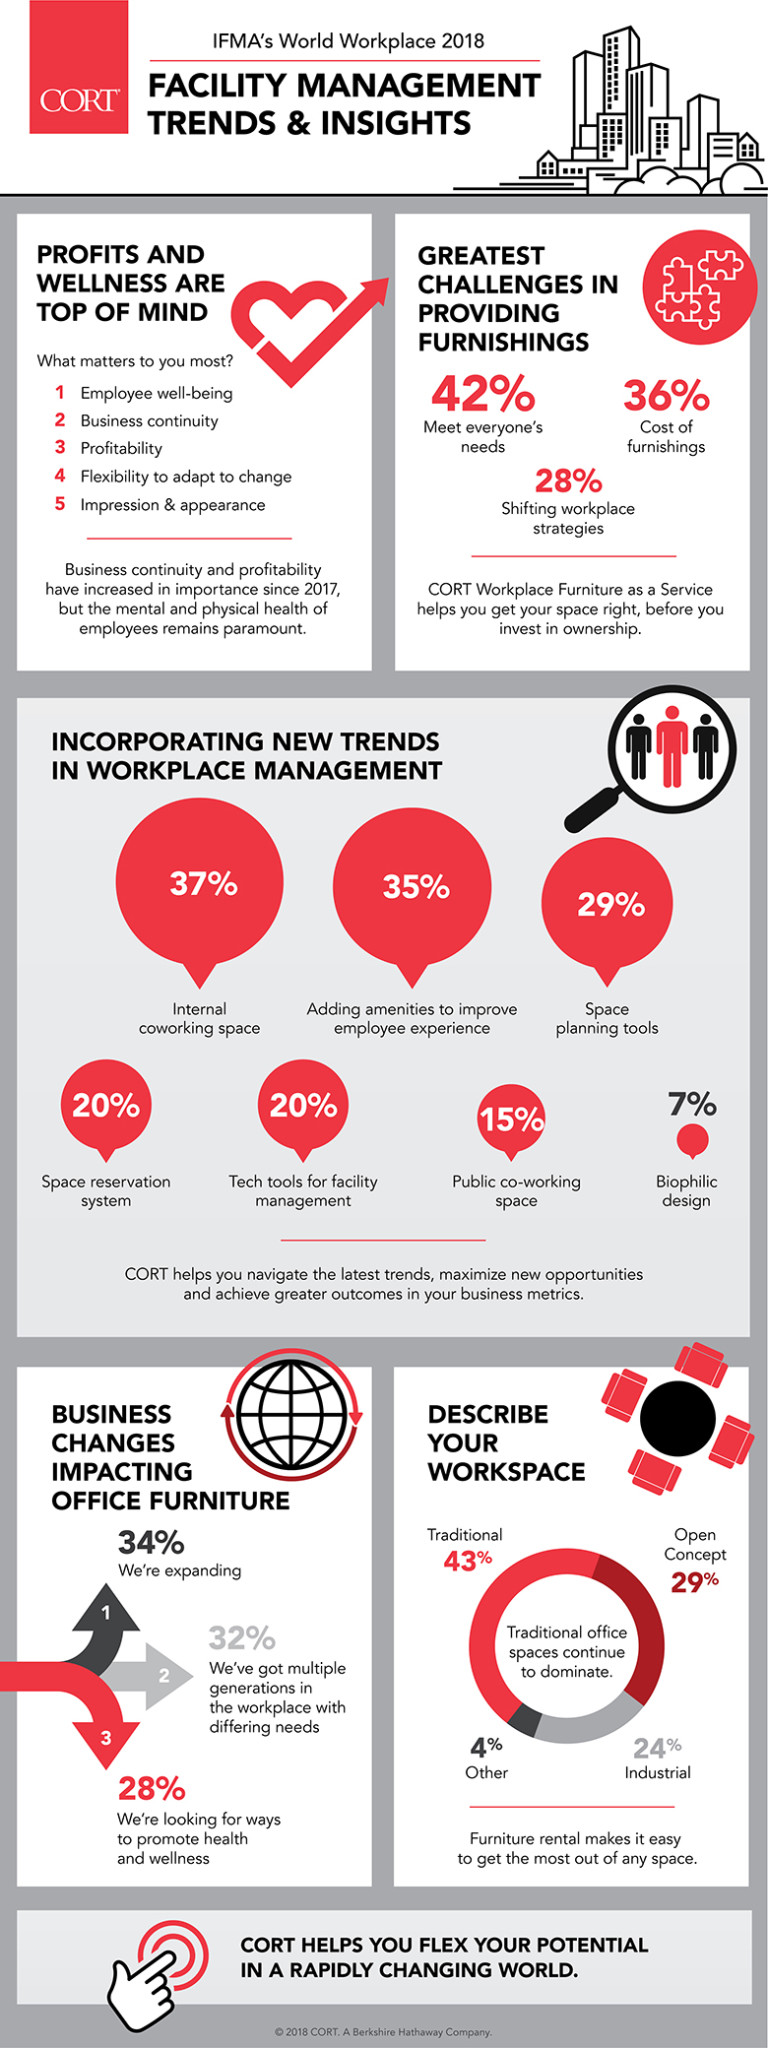 2018 facility management trends and insights infographic